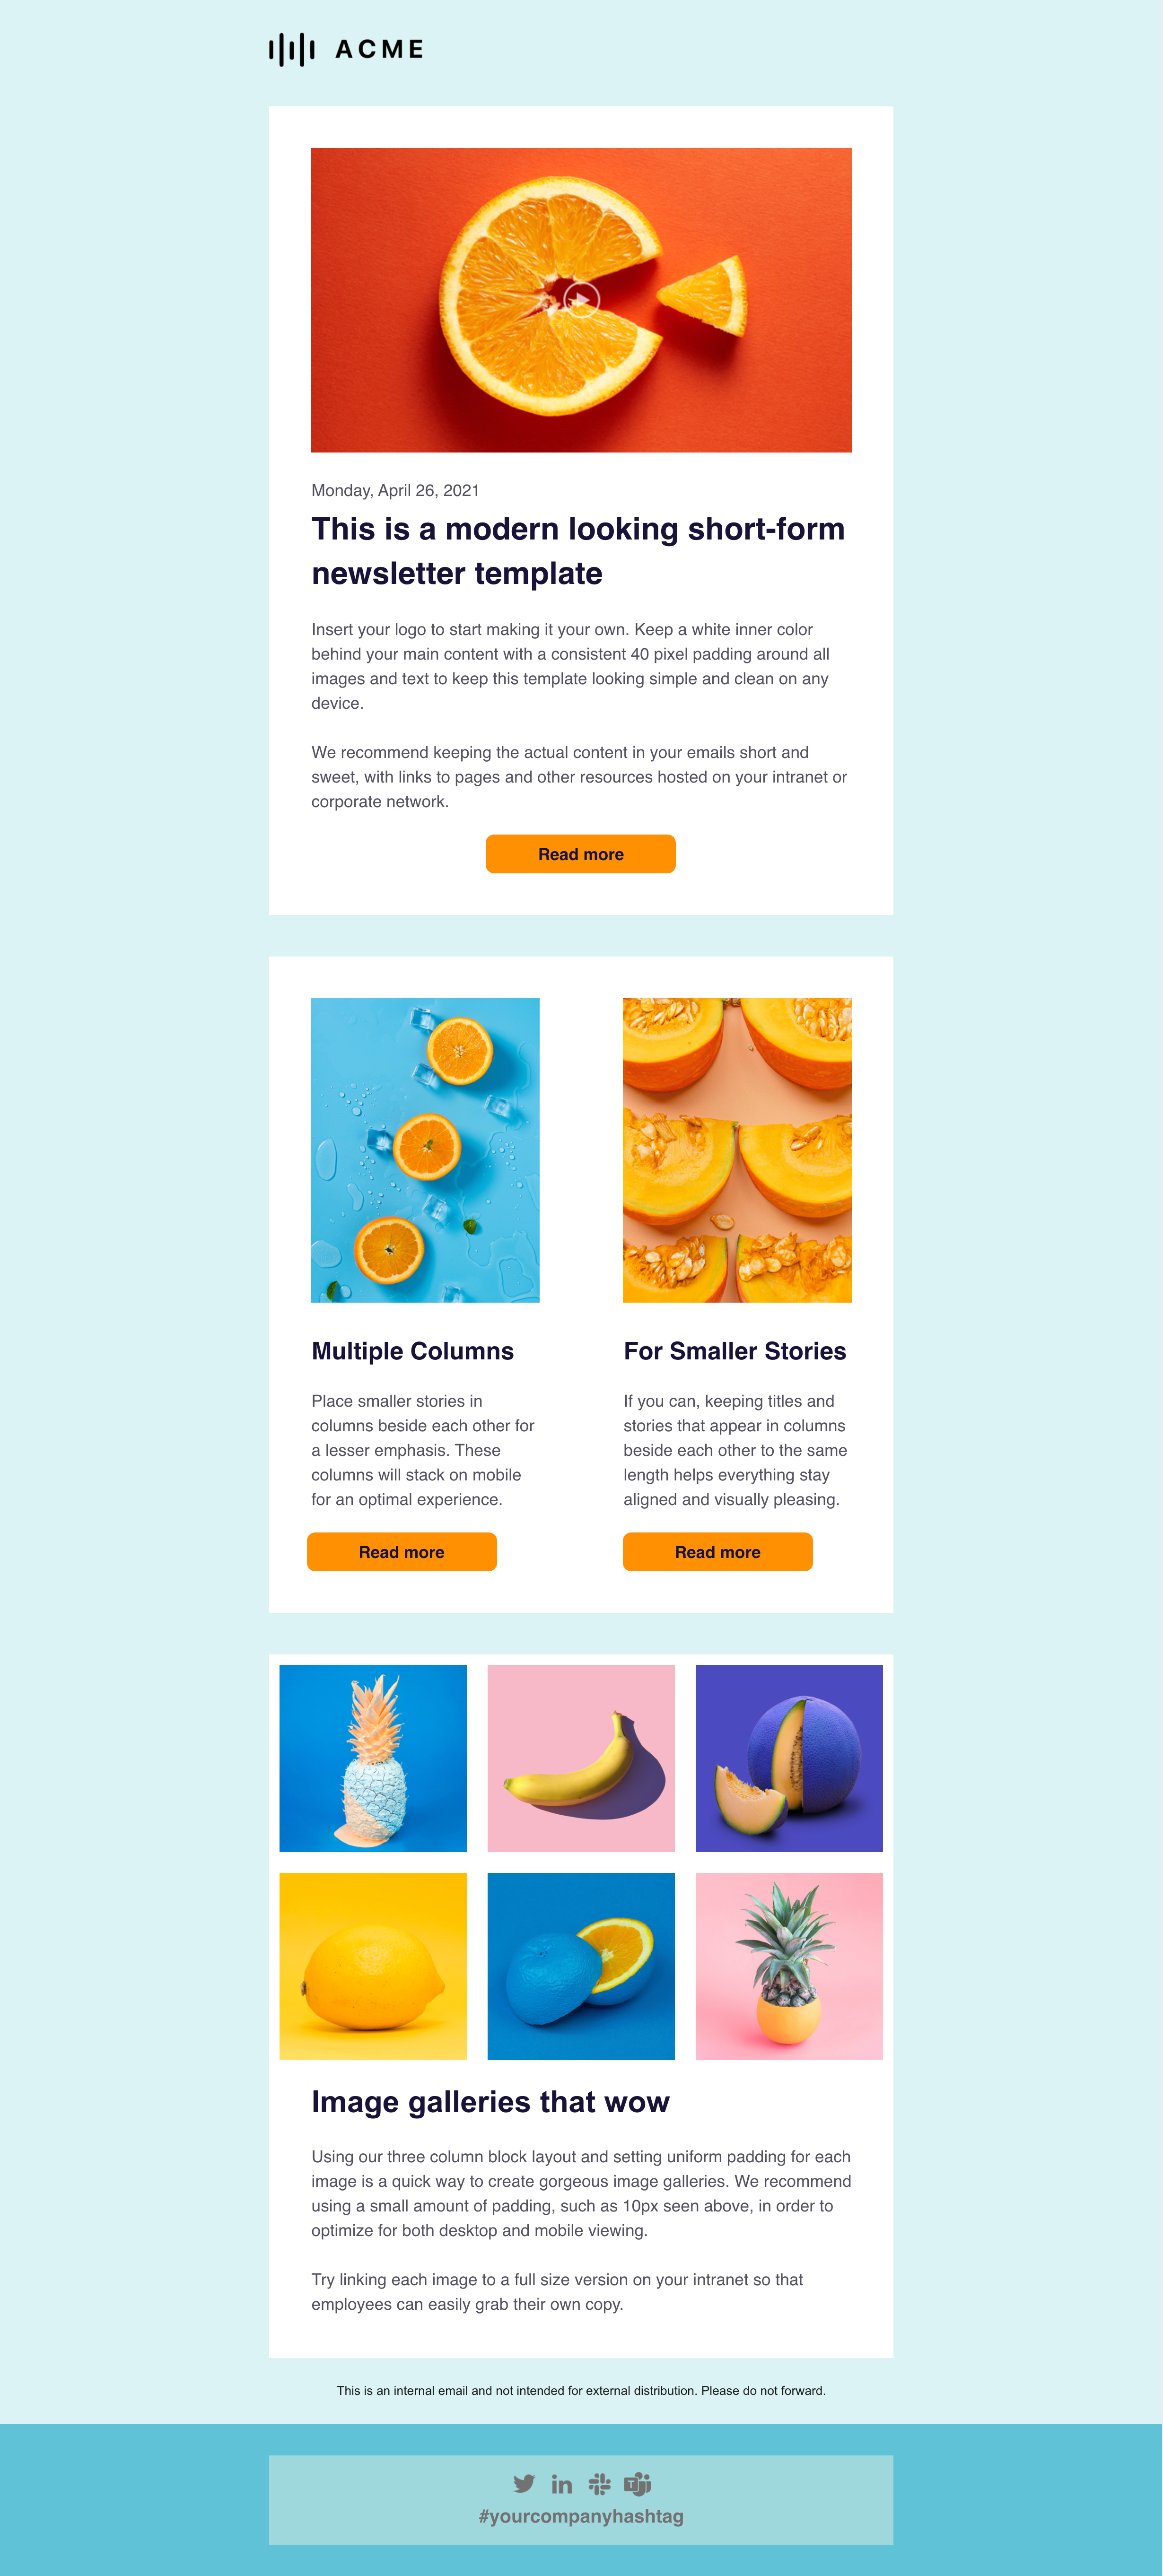 Newsletter template featuring a header image with an orange, text blocks, a button that says "Read More".